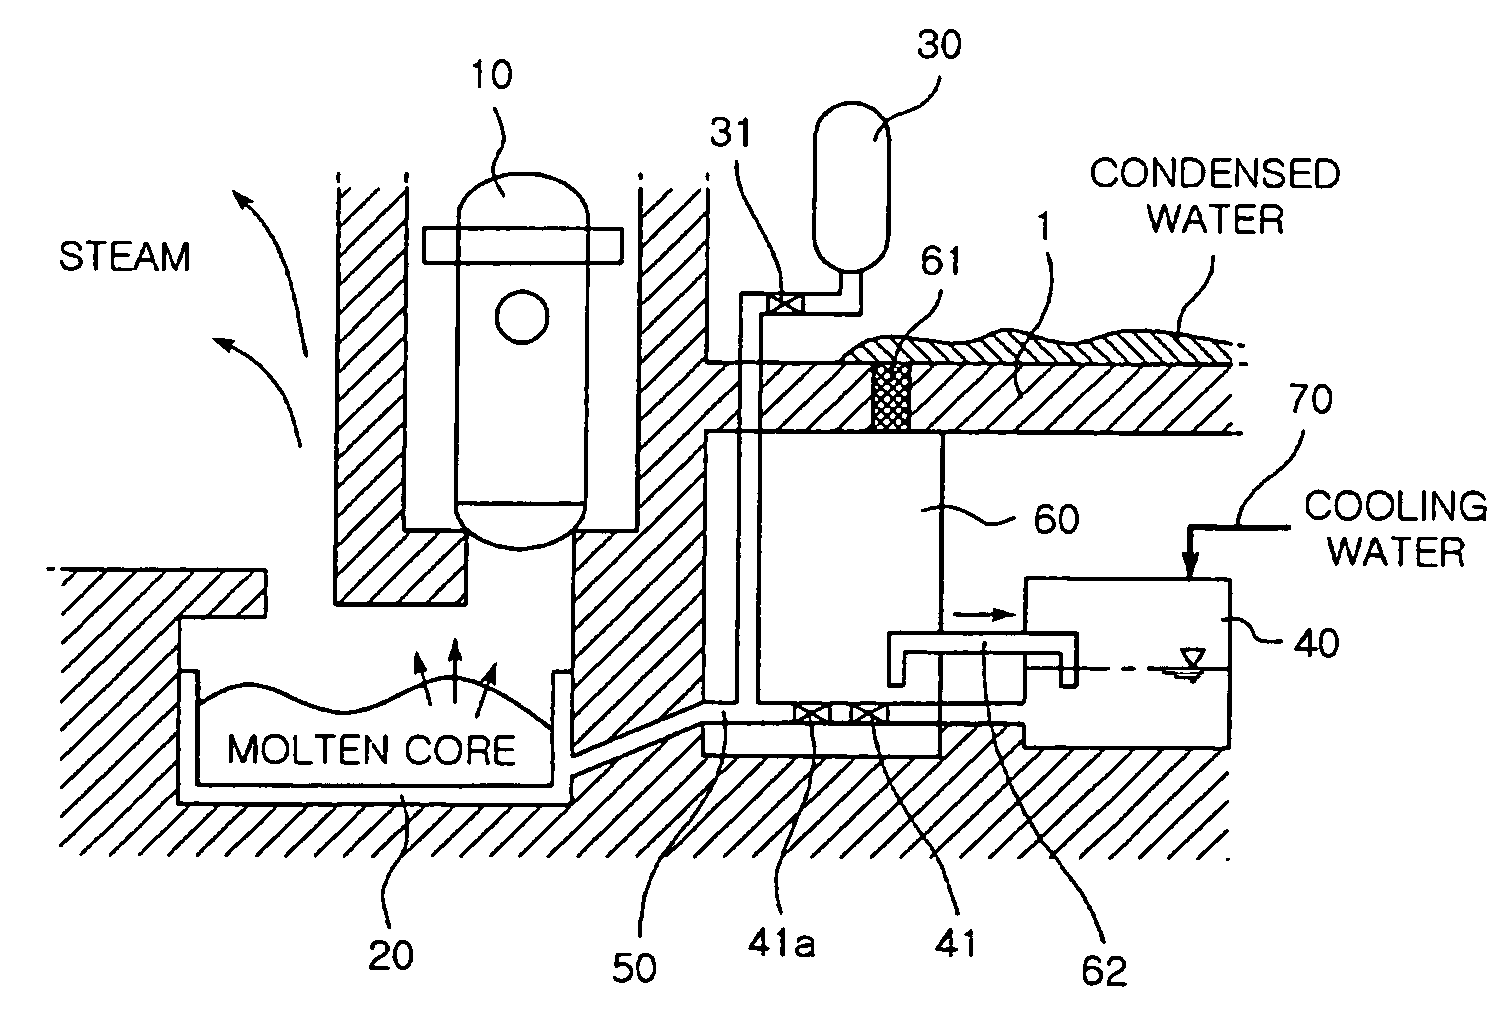 Passive cooling and arresting device for molten core material